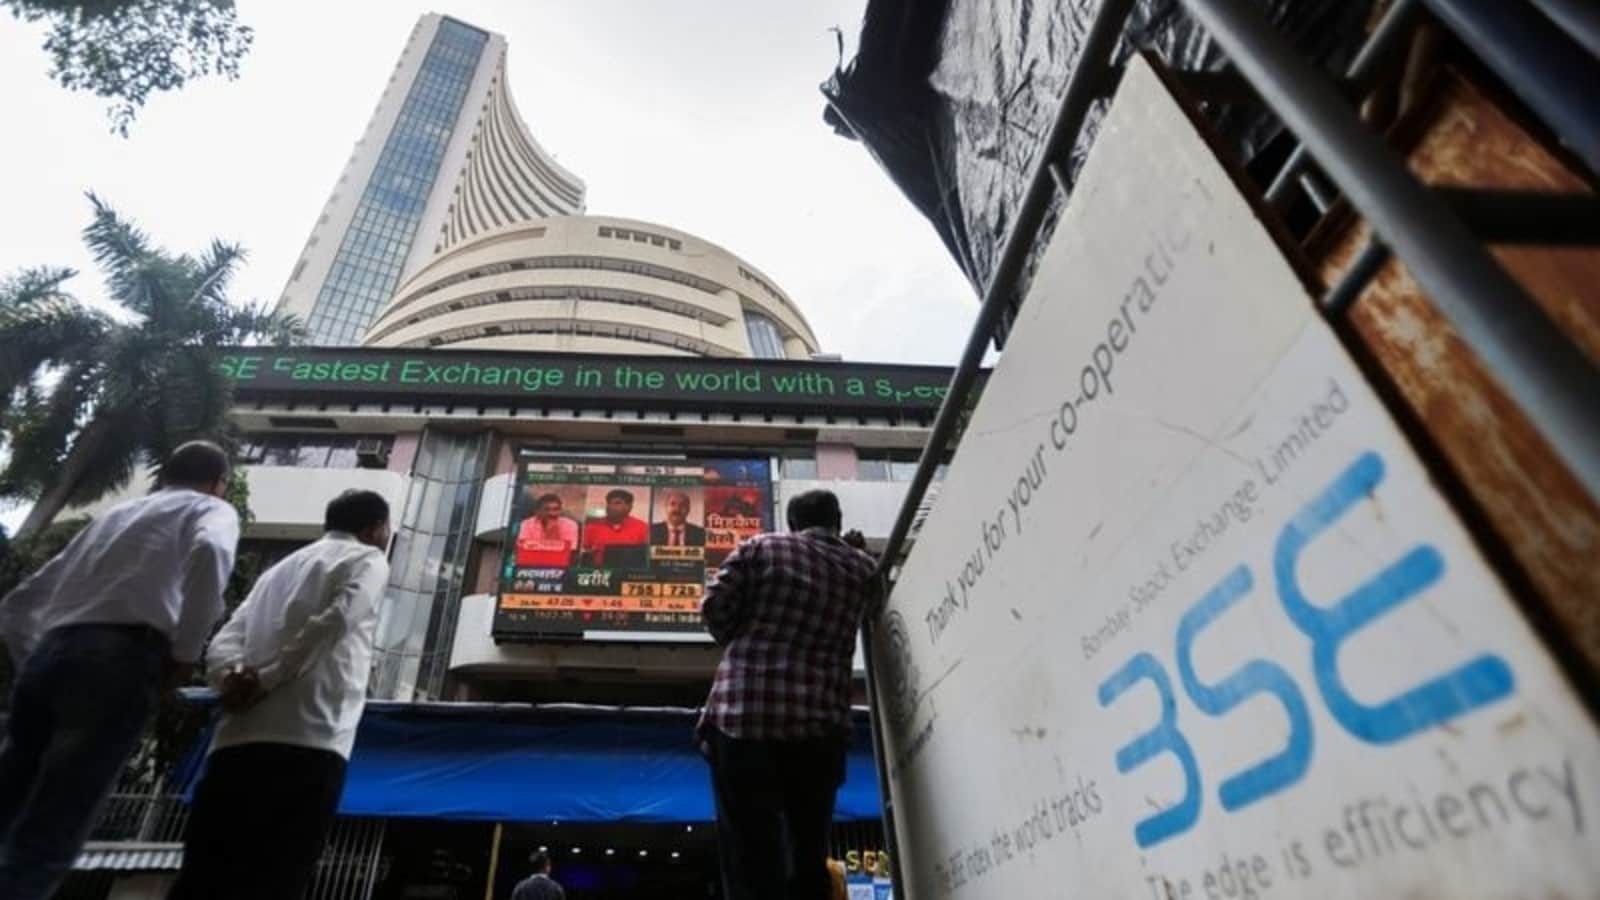 Sensex up by 578 points to close at 59,719; Nifty up by 194 points